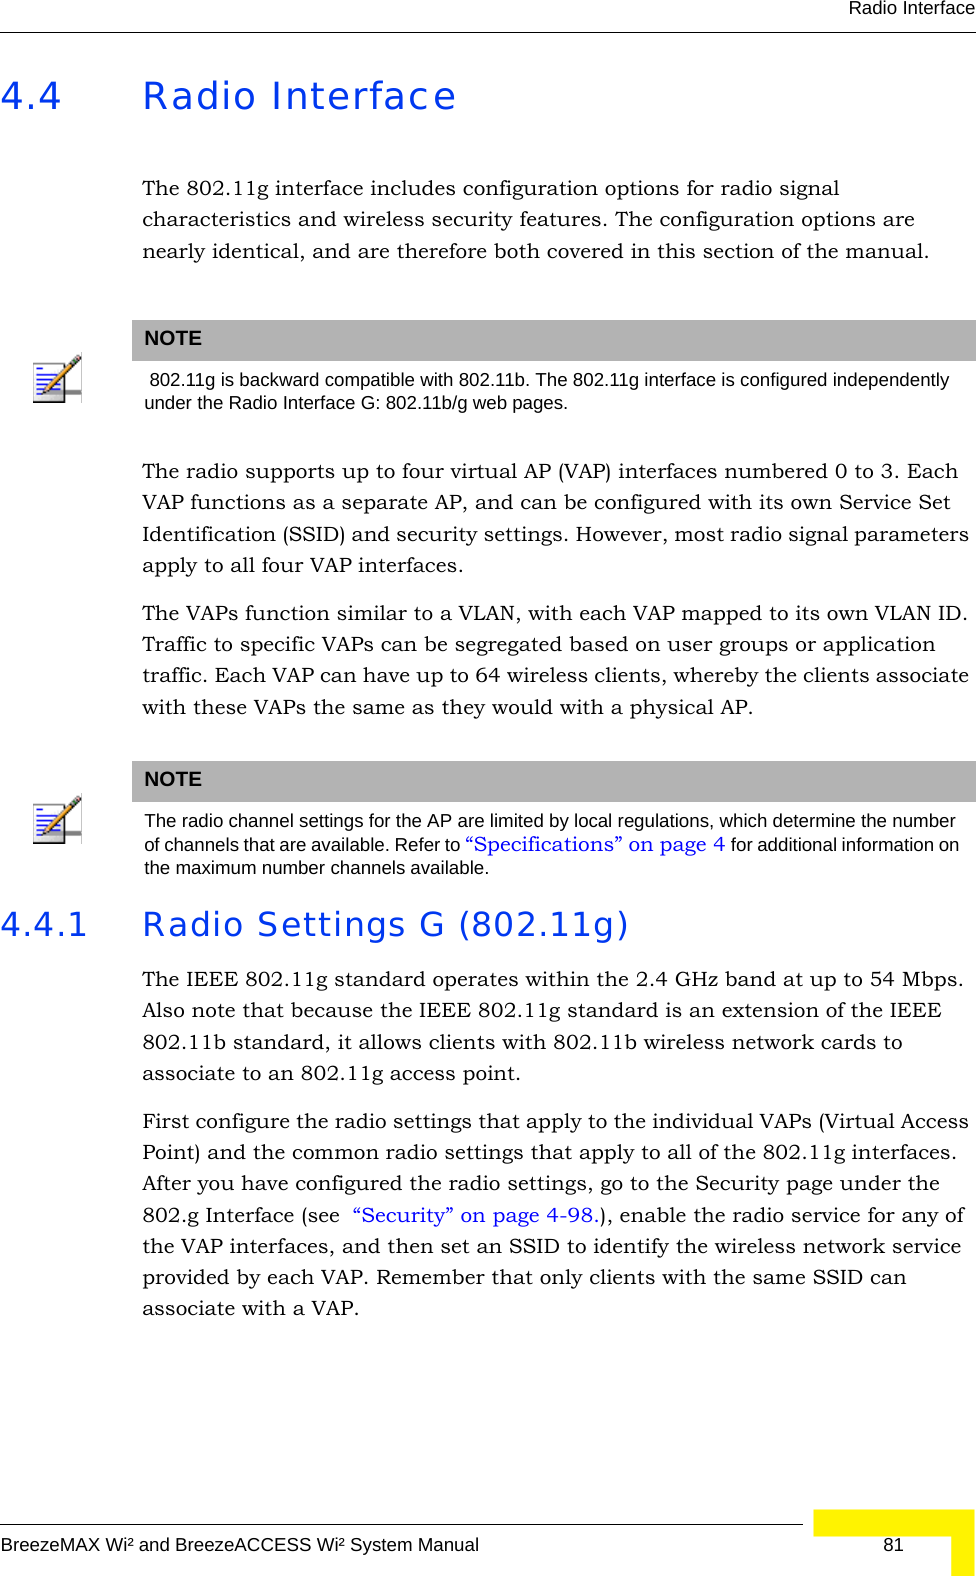 Radio InterfaceBreezeMAX Wi² and BreezeACCESS Wi² System Manual  814.4 Radio InterfaceThe 802.11g interface includes configuration options for radio signal characteristics and wireless security features. The configuration options are nearly identical, and are therefore both covered in this section of the manual. The radio supports up to four virtual AP (VAP) interfaces numbered 0 to 3. Each VAP functions as a separate AP, and can be configured with its own Service Set Identification (SSID) and security settings. However, most radio signal parameters apply to all four VAP interfaces. The VAPs function similar to a VLAN, with each VAP mapped to its own VLAN ID. Traffic to specific VAPs can be segregated based on user groups or application traffic. Each VAP can have up to 64 wireless clients, whereby the clients associate with these VAPs the same as they would with a physical AP. 4.4.1 Radio Settings G (802.11g)The IEEE 802.11g standard operates within the 2.4 GHz band at up to 54 Mbps. Also note that because the IEEE 802.11g standard is an extension of the IEEE 802.11b standard, it allows clients with 802.11b wireless network cards to associate to an 802.11g access point.First configure the radio settings that apply to the individual VAPs (Virtual Access Point) and the common radio settings that apply to all of the 802.11g interfaces. After you have configured the radio settings, go to the Security page under the 802.g Interface (see  “Security” on page 4-98.), enable the radio service for any of the VAP interfaces, and then set an SSID to identify the wireless network service provided by each VAP. Remember that only clients with the same SSID can associate with a VAP.NOTE 802.11g is backward compatible with 802.11b. The 802.11g interface is configured independently under the Radio Interface G: 802.11b/g web pages.NOTEThe radio channel settings for the AP are limited by local regulations, which determine the number of channels that are available. Refer to “Specifications” on page 4 for additional information on the maximum number channels available. 